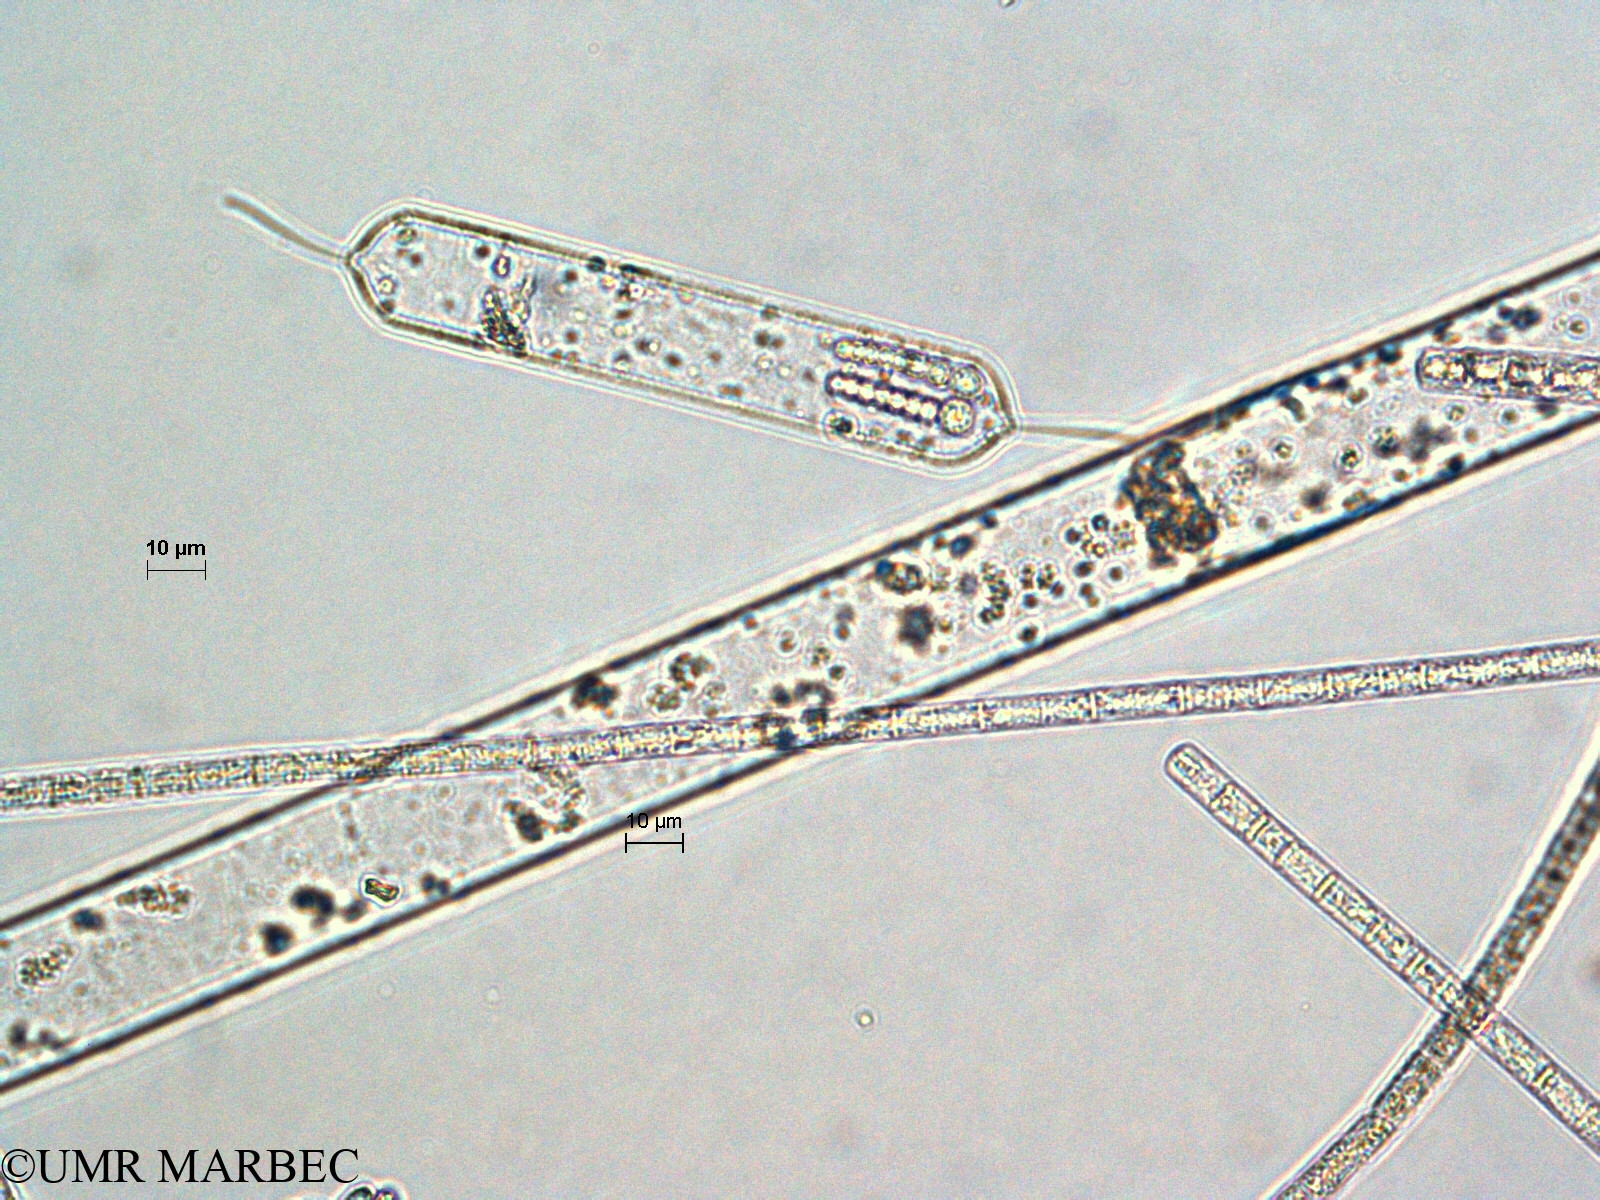 phyto/Scattered_Islands/all/COMMA April 2011/Rhizosolenia cylindrus (ancien G. sp1 cf cylindrus -1)(copy).jpg